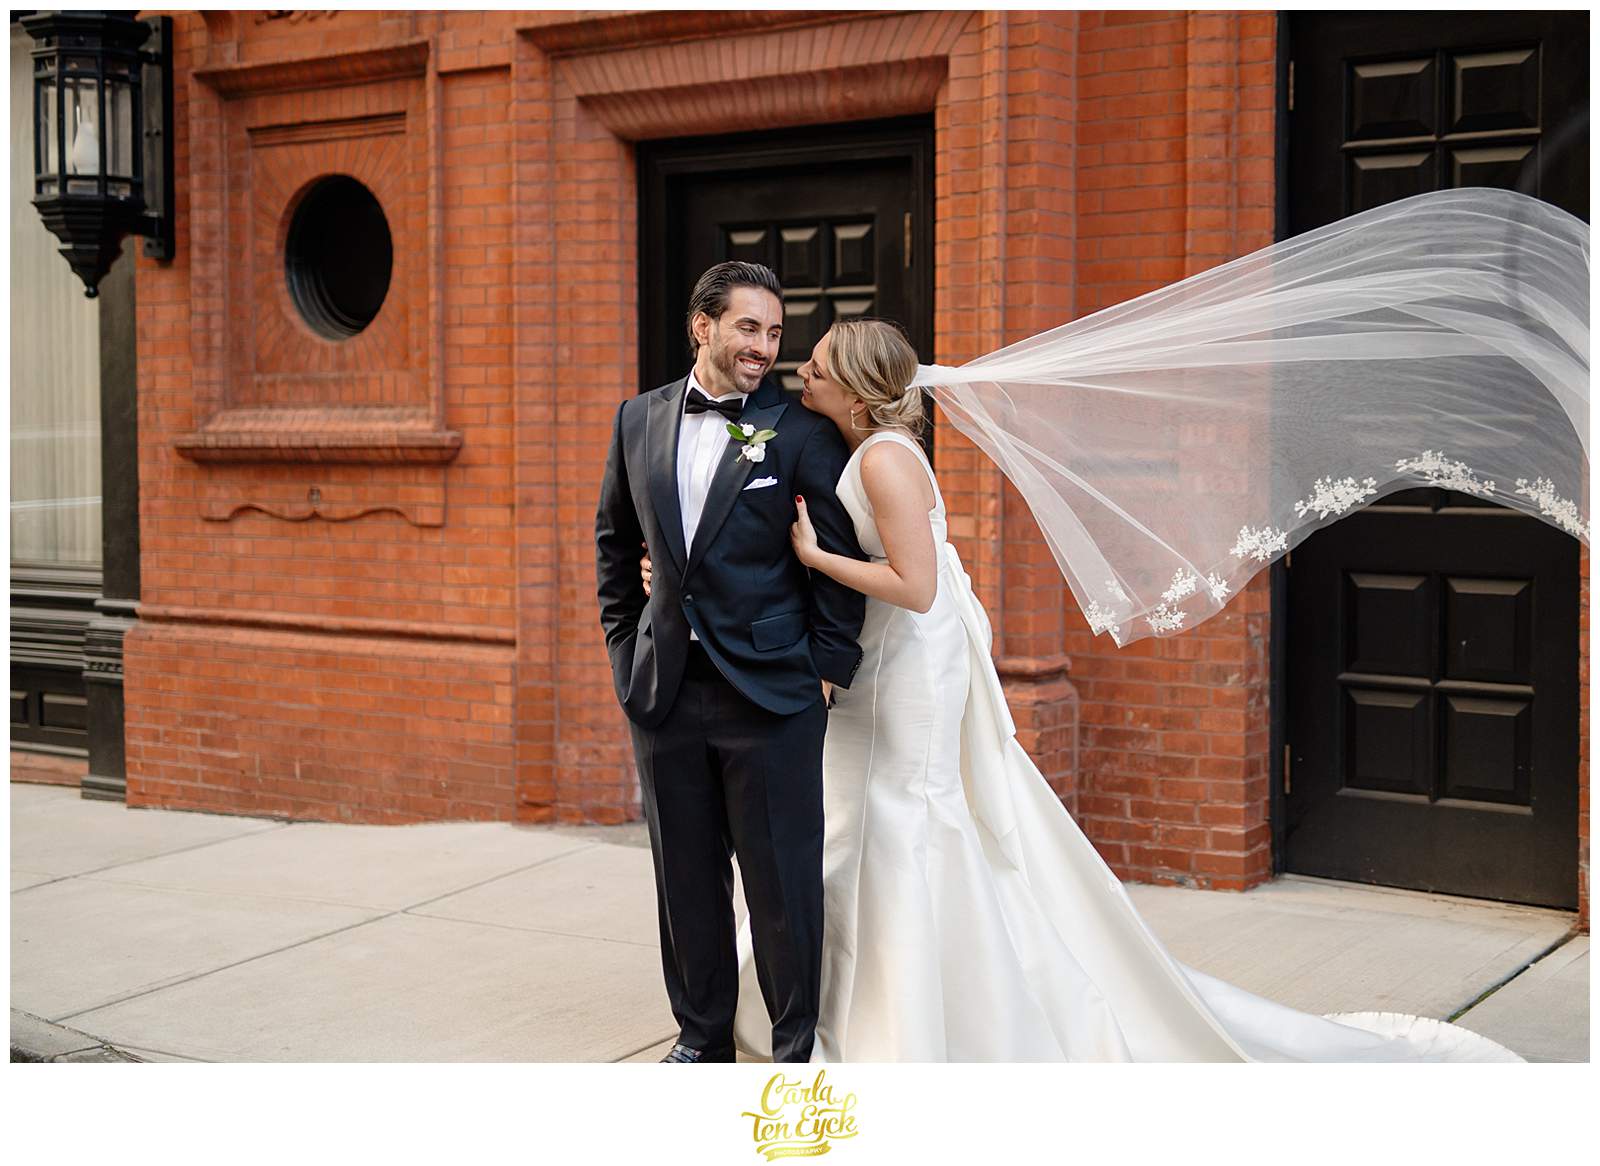 A couple poses for photos at their Goodwin Hotel Wedding in Hartford CT